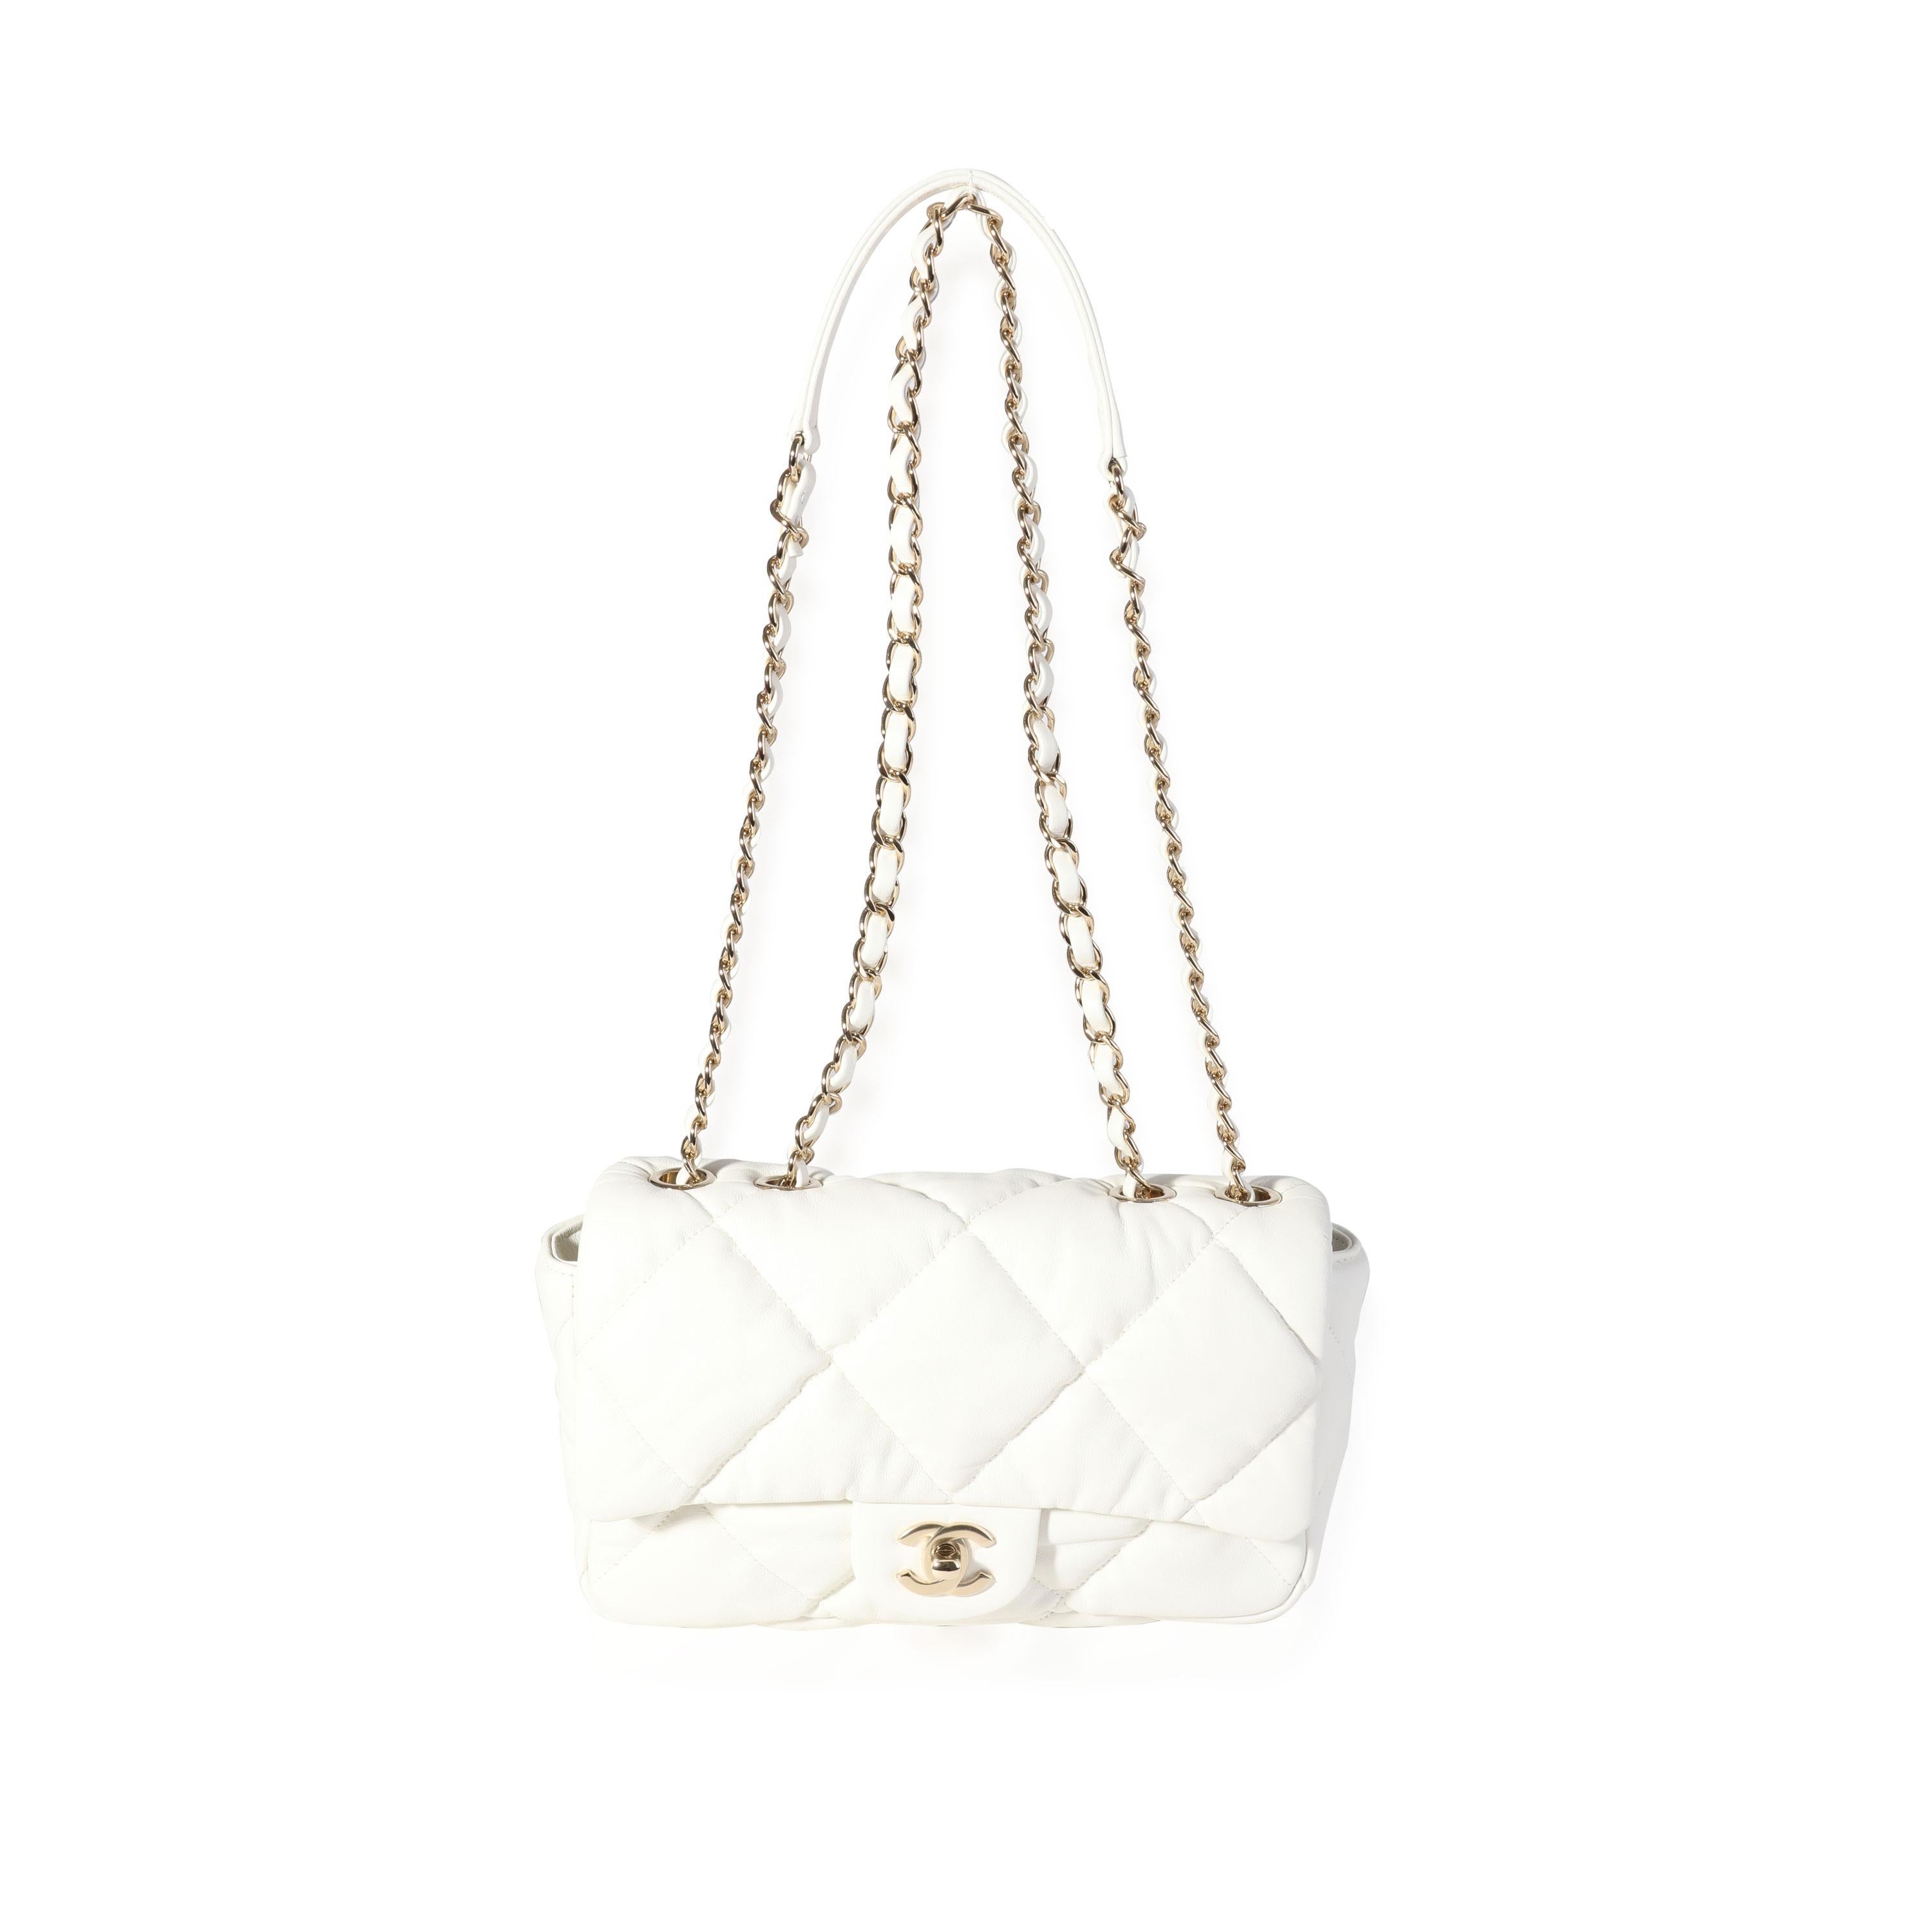 Listing Title: Chanel White Quilted Lambskin Bubble Flap Bag
SKU: 118317
Condition: Pre-owned (3000)
Handbag Condition: Mint
Condition Comments: Mint Condition. Plastic on some hardware. No visible signs of wear. Final sale.
Brand: Chanel
Model: